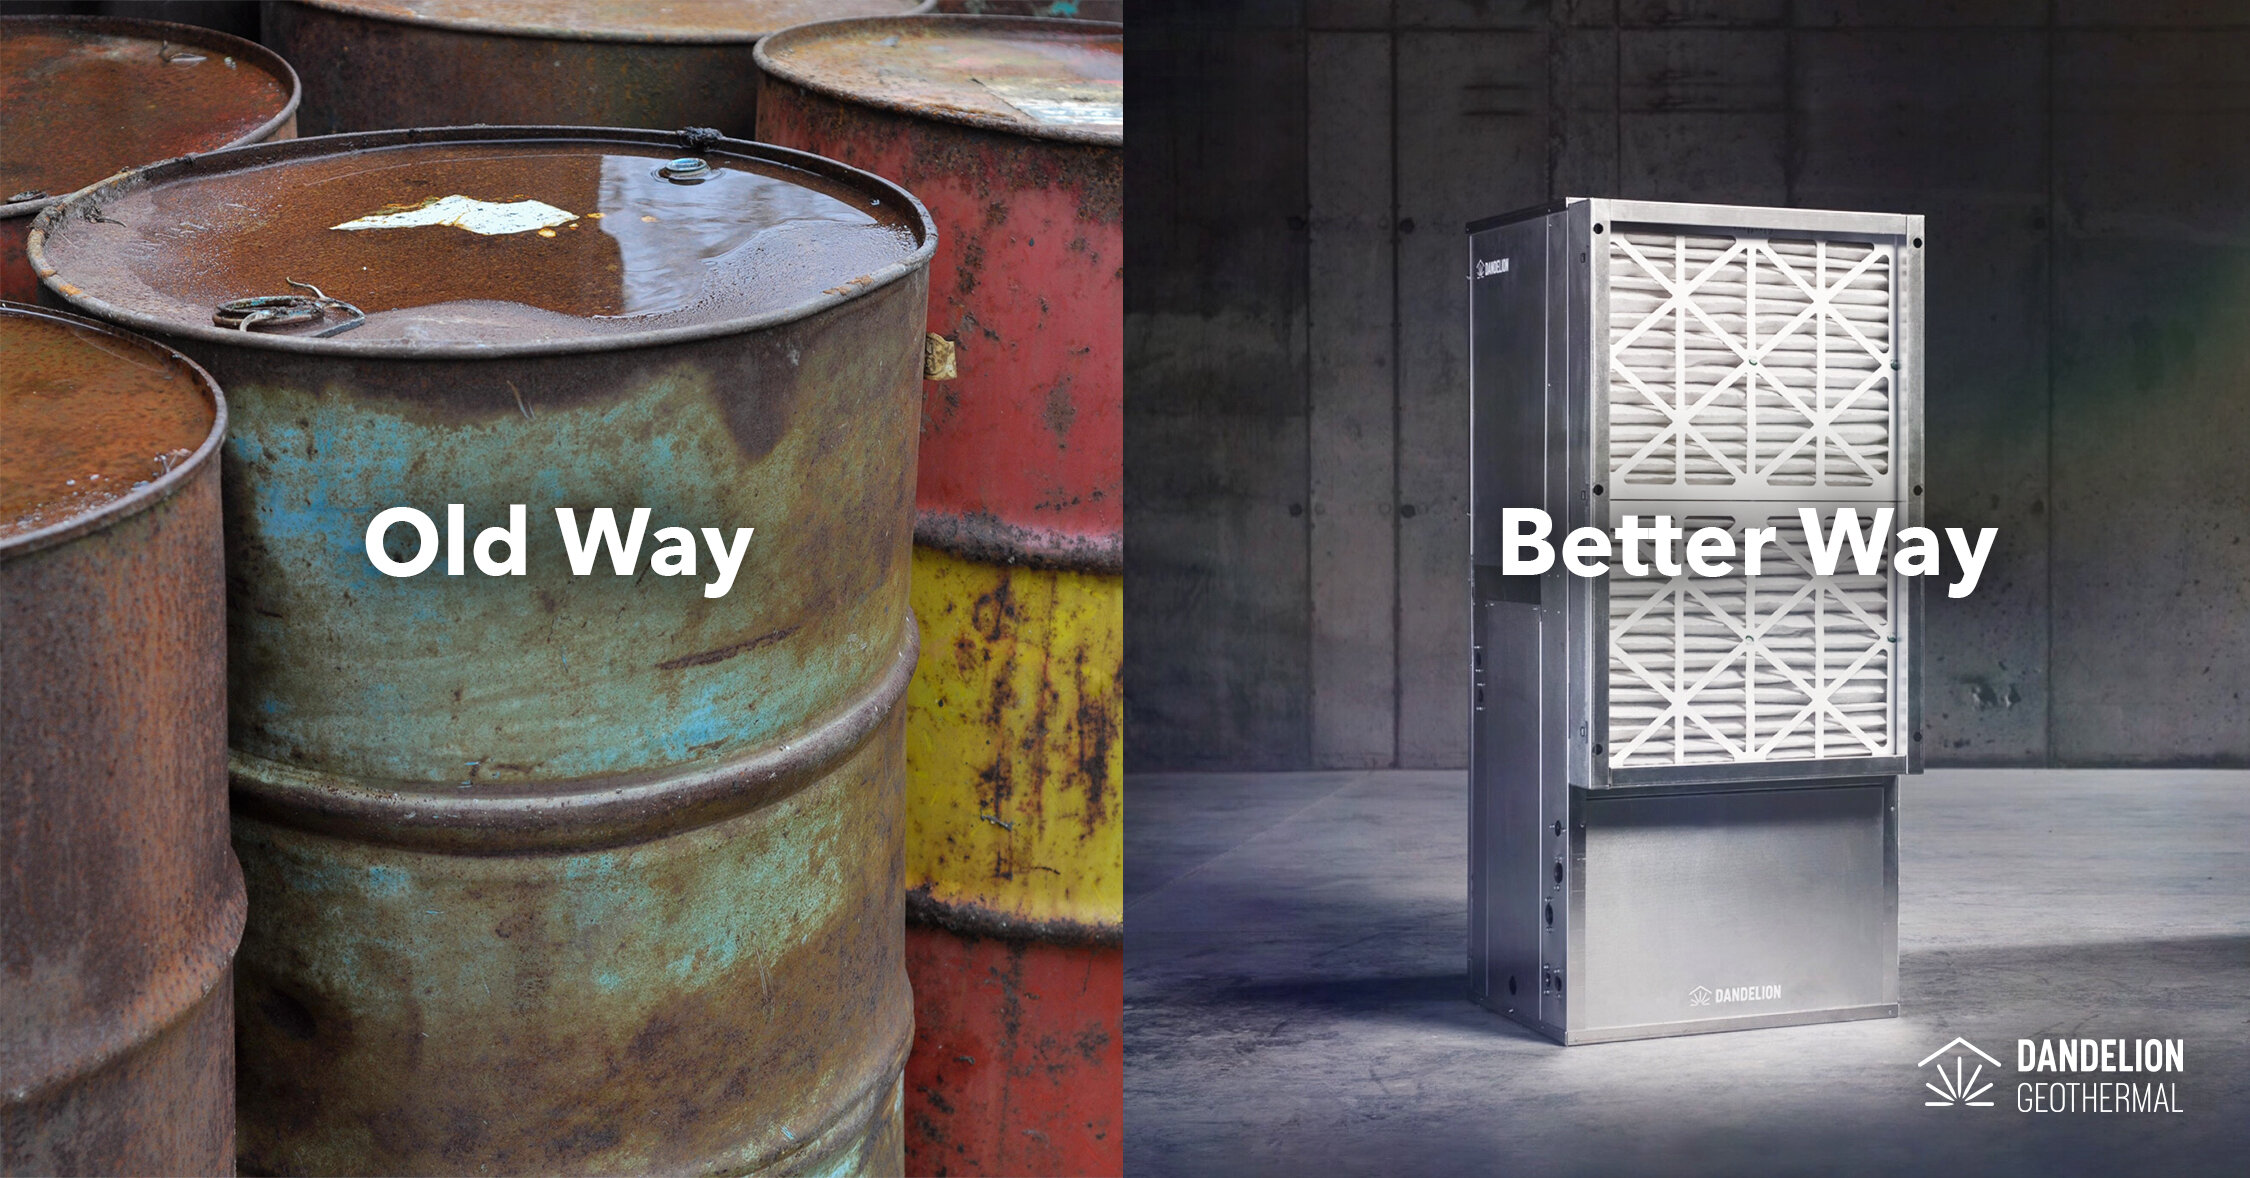 A side by side ad of oil drums, labeled 'Old Way' and a Dandelion Geothermal unit labeled 'Better way'.